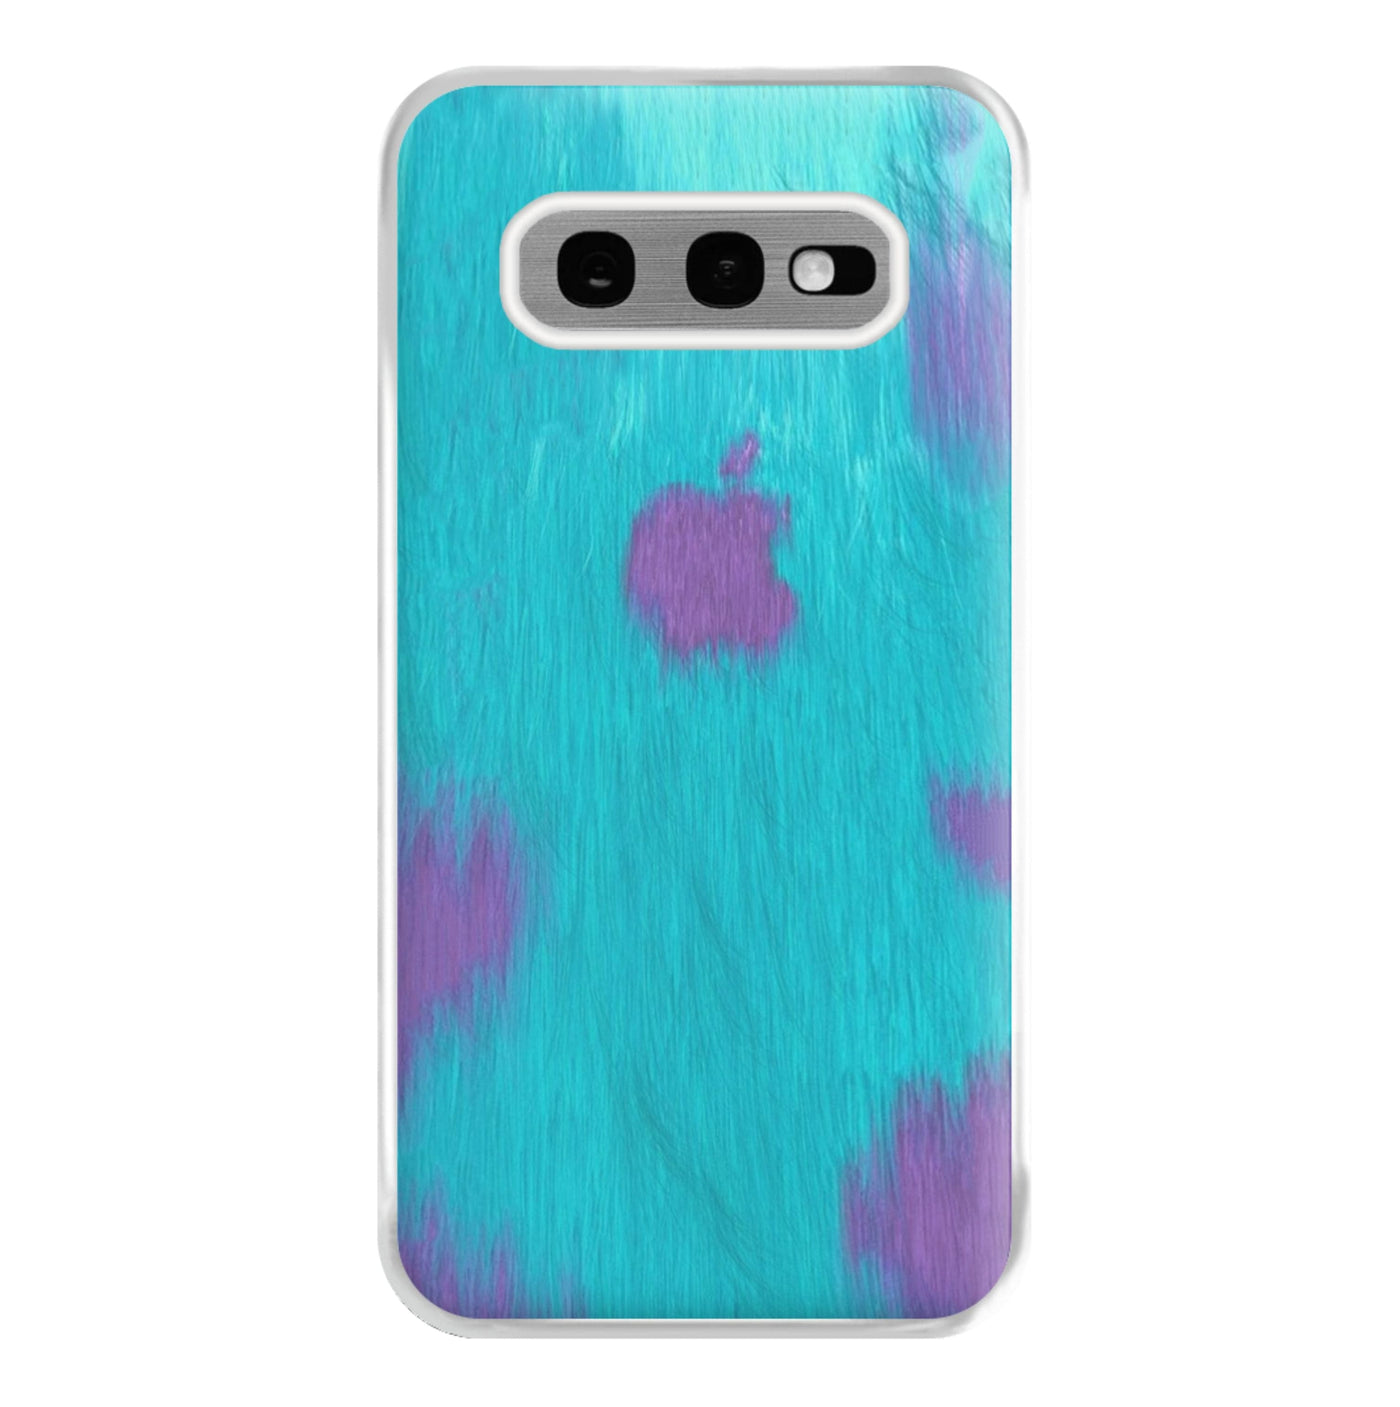 iSulley - Monsters Inc Phone Case